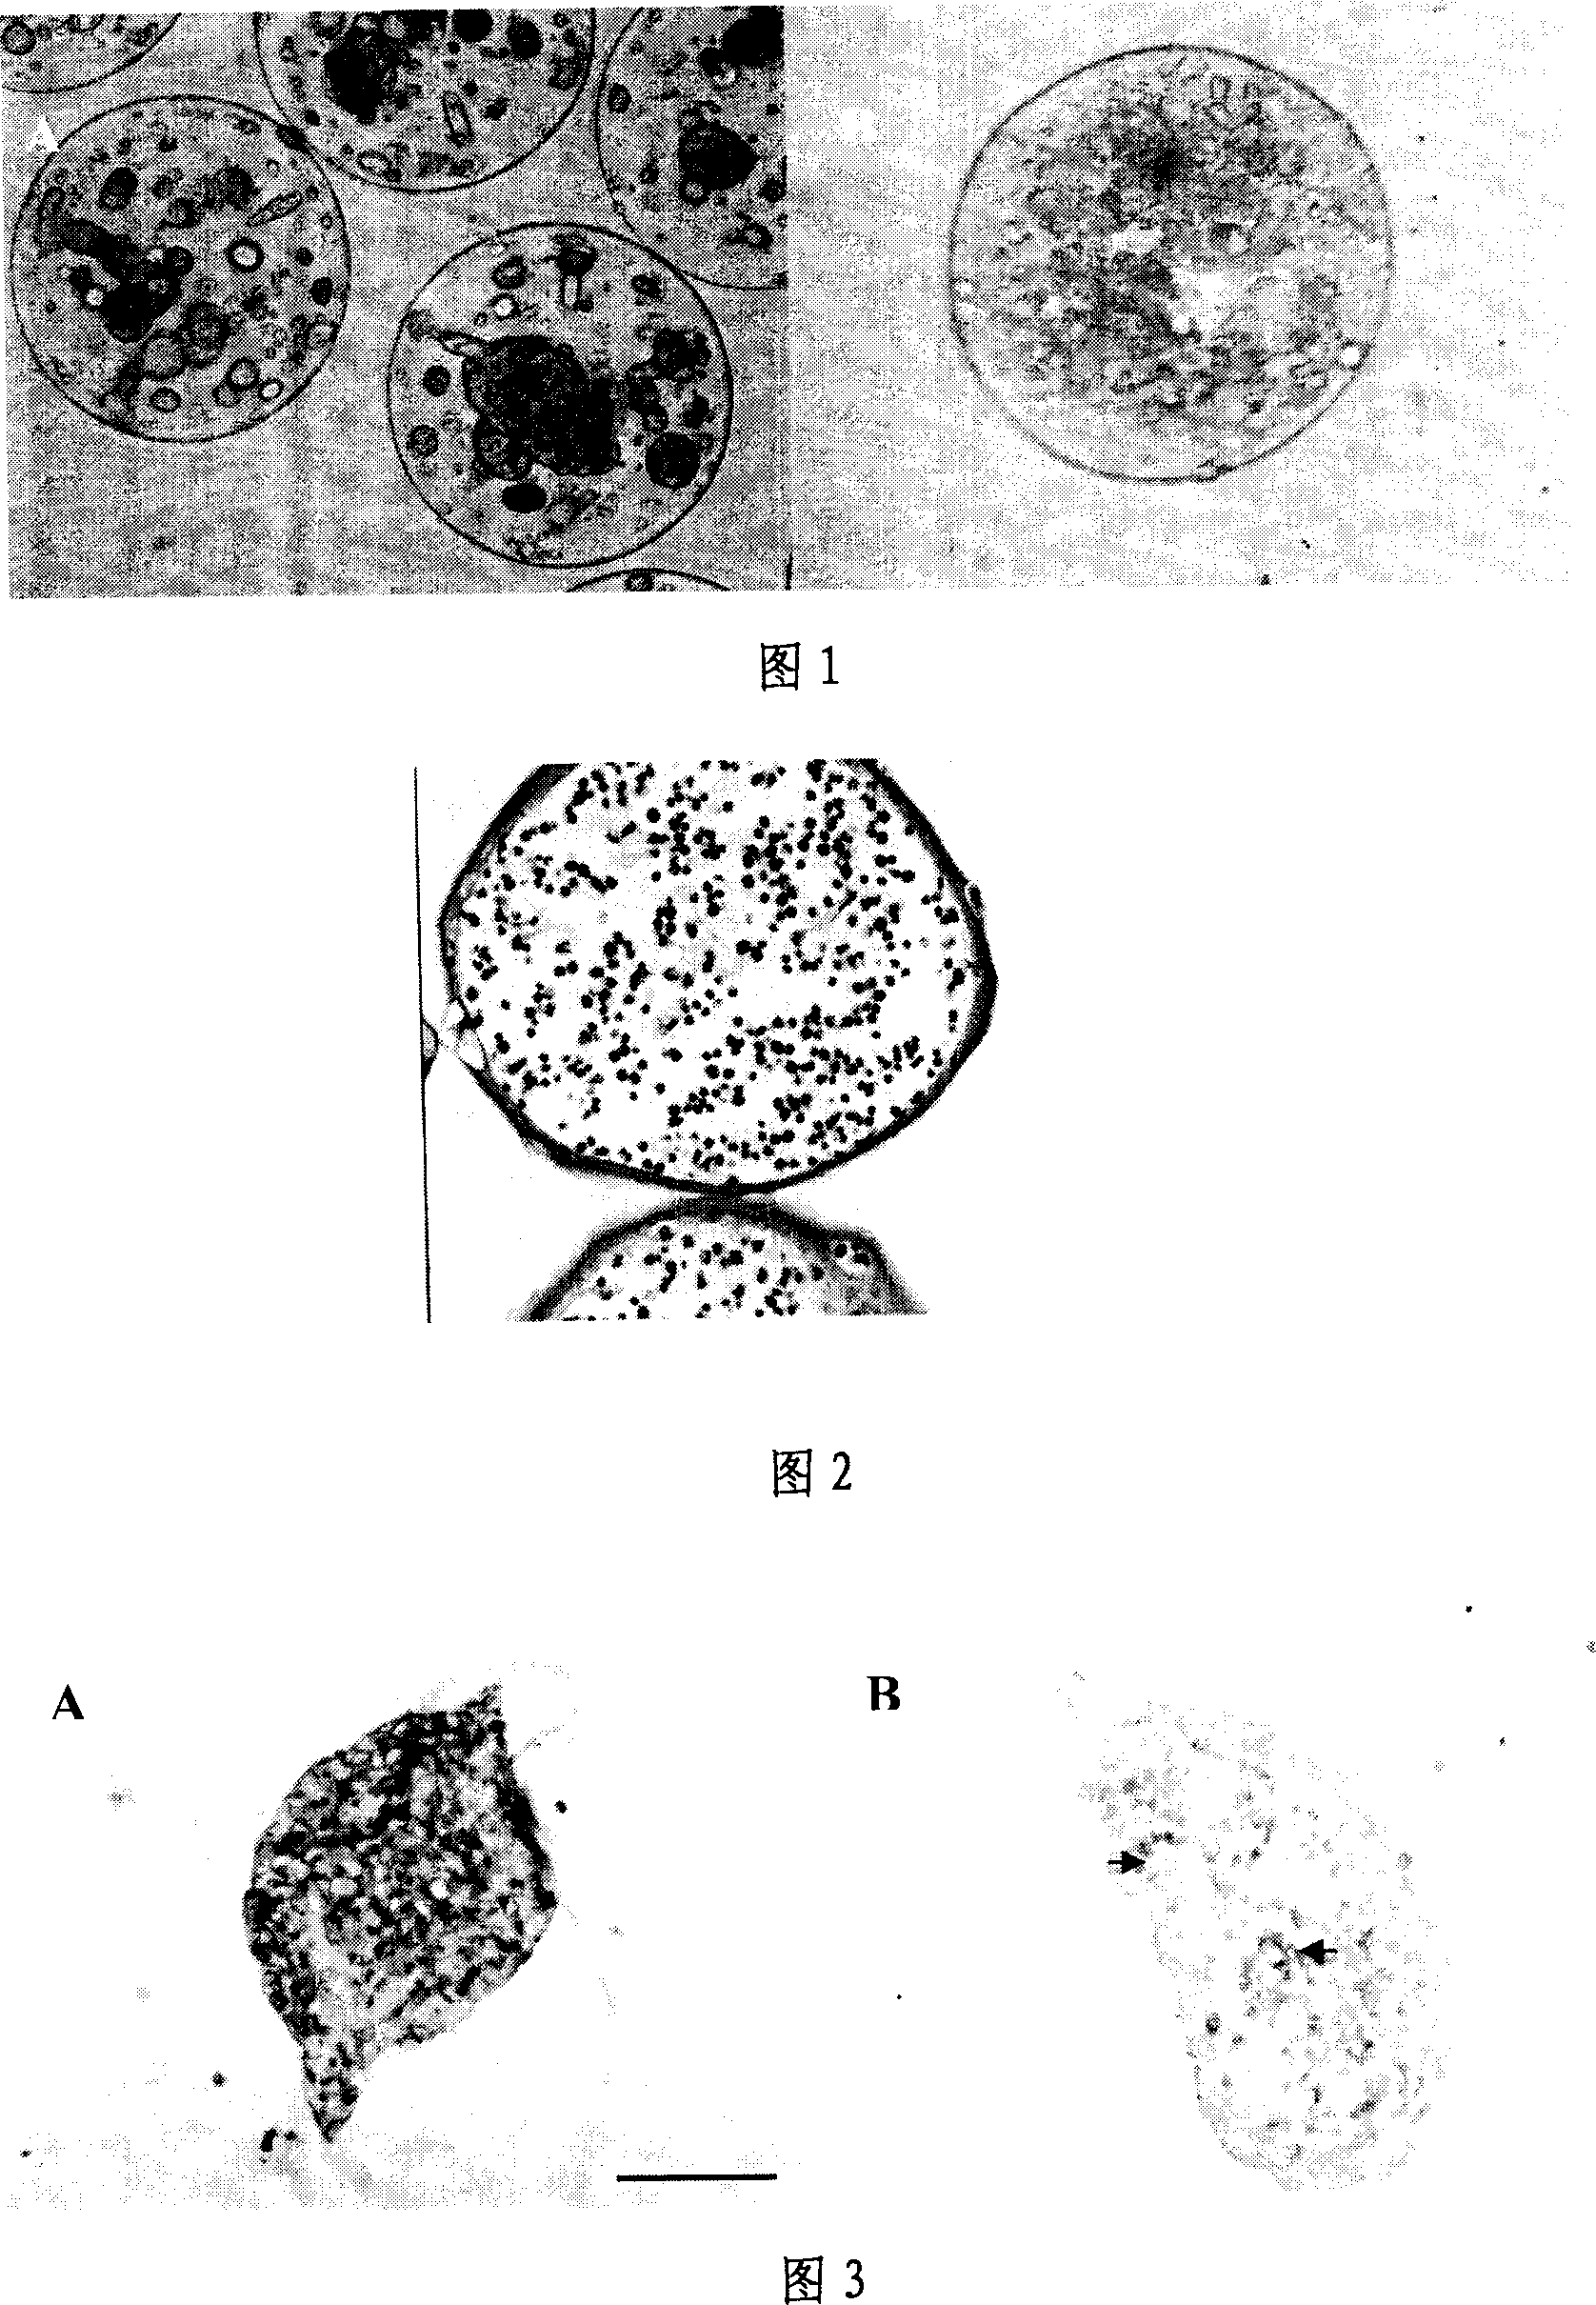 Method for realizing directional proliferation and differentiation of stem cell